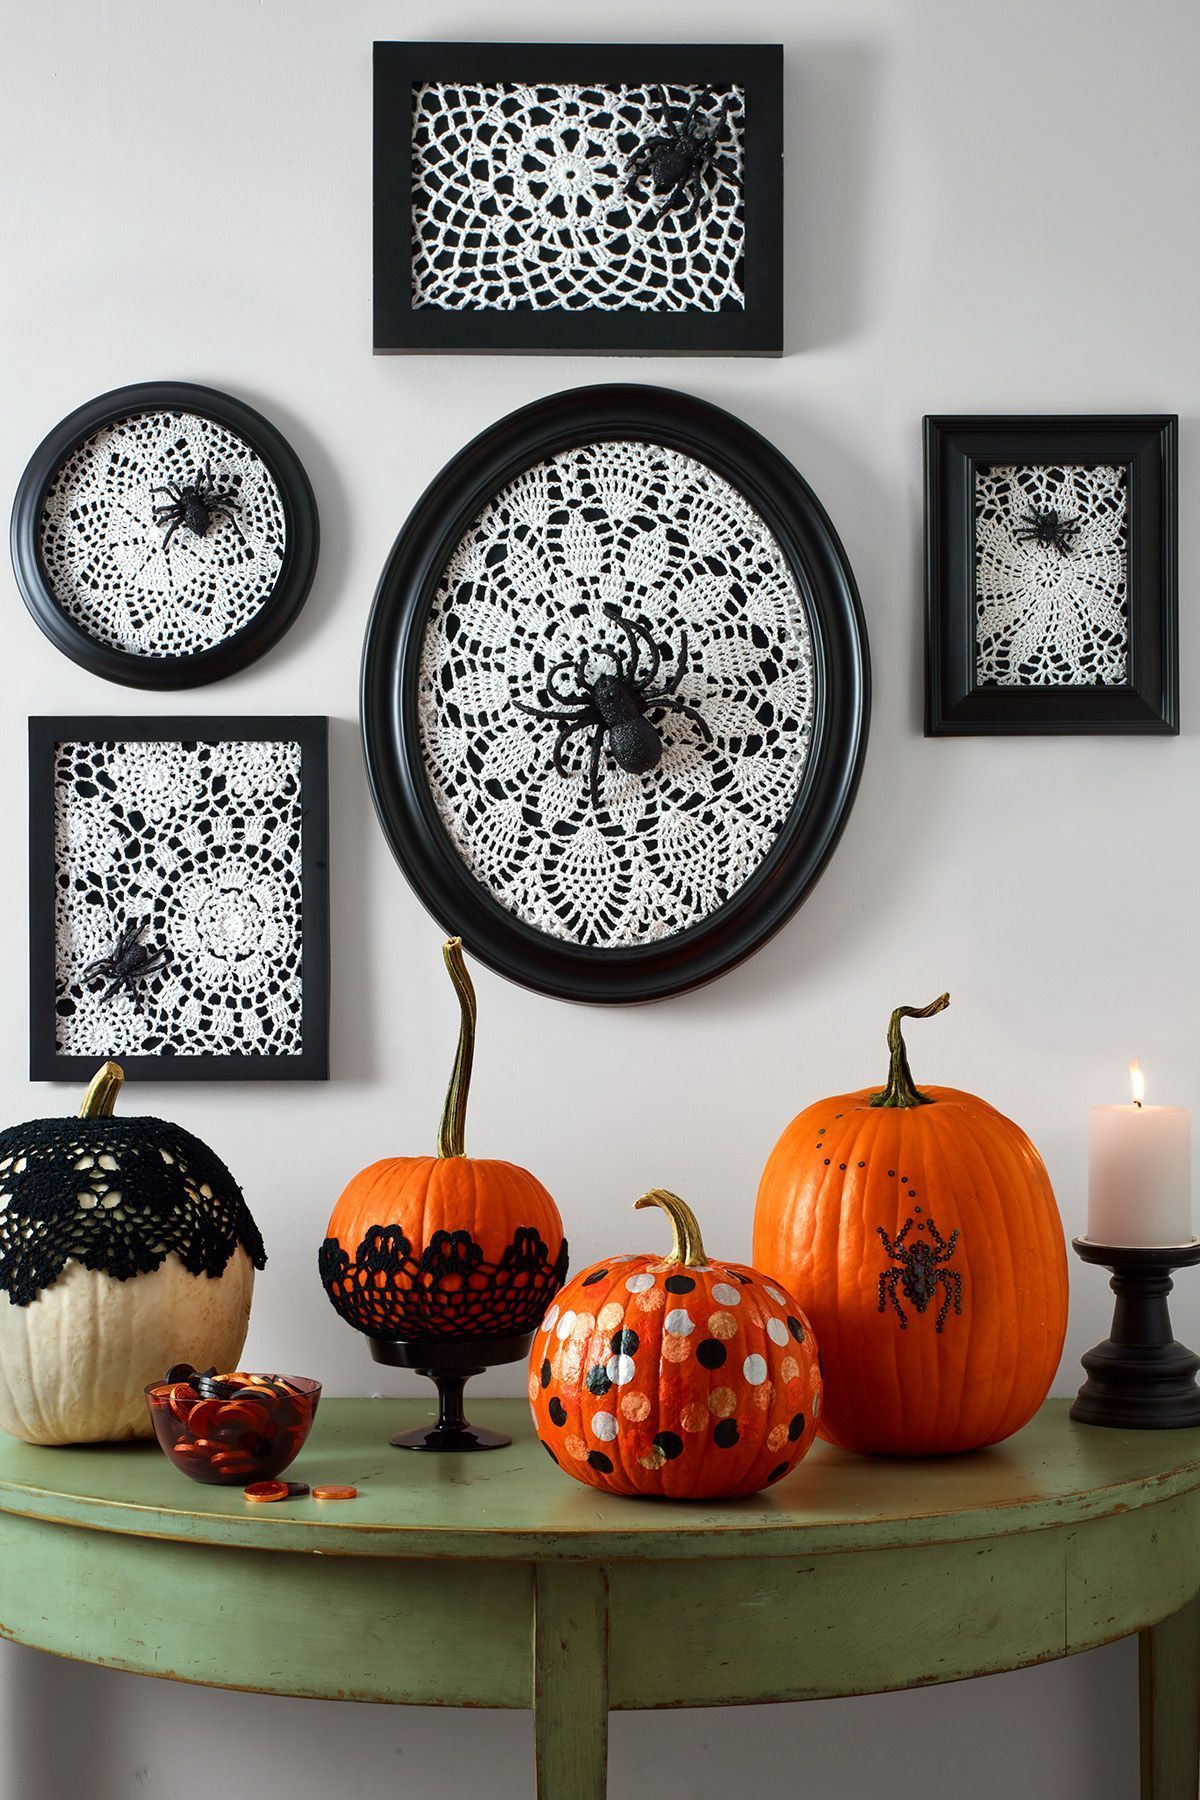 Throw an Epic Halloween Party With These 52 Food and Decor Ideas - Throw an Epic Halloween Party With These 52 Food and Decor Ideas -   19 diy Home Decor halloween ideas